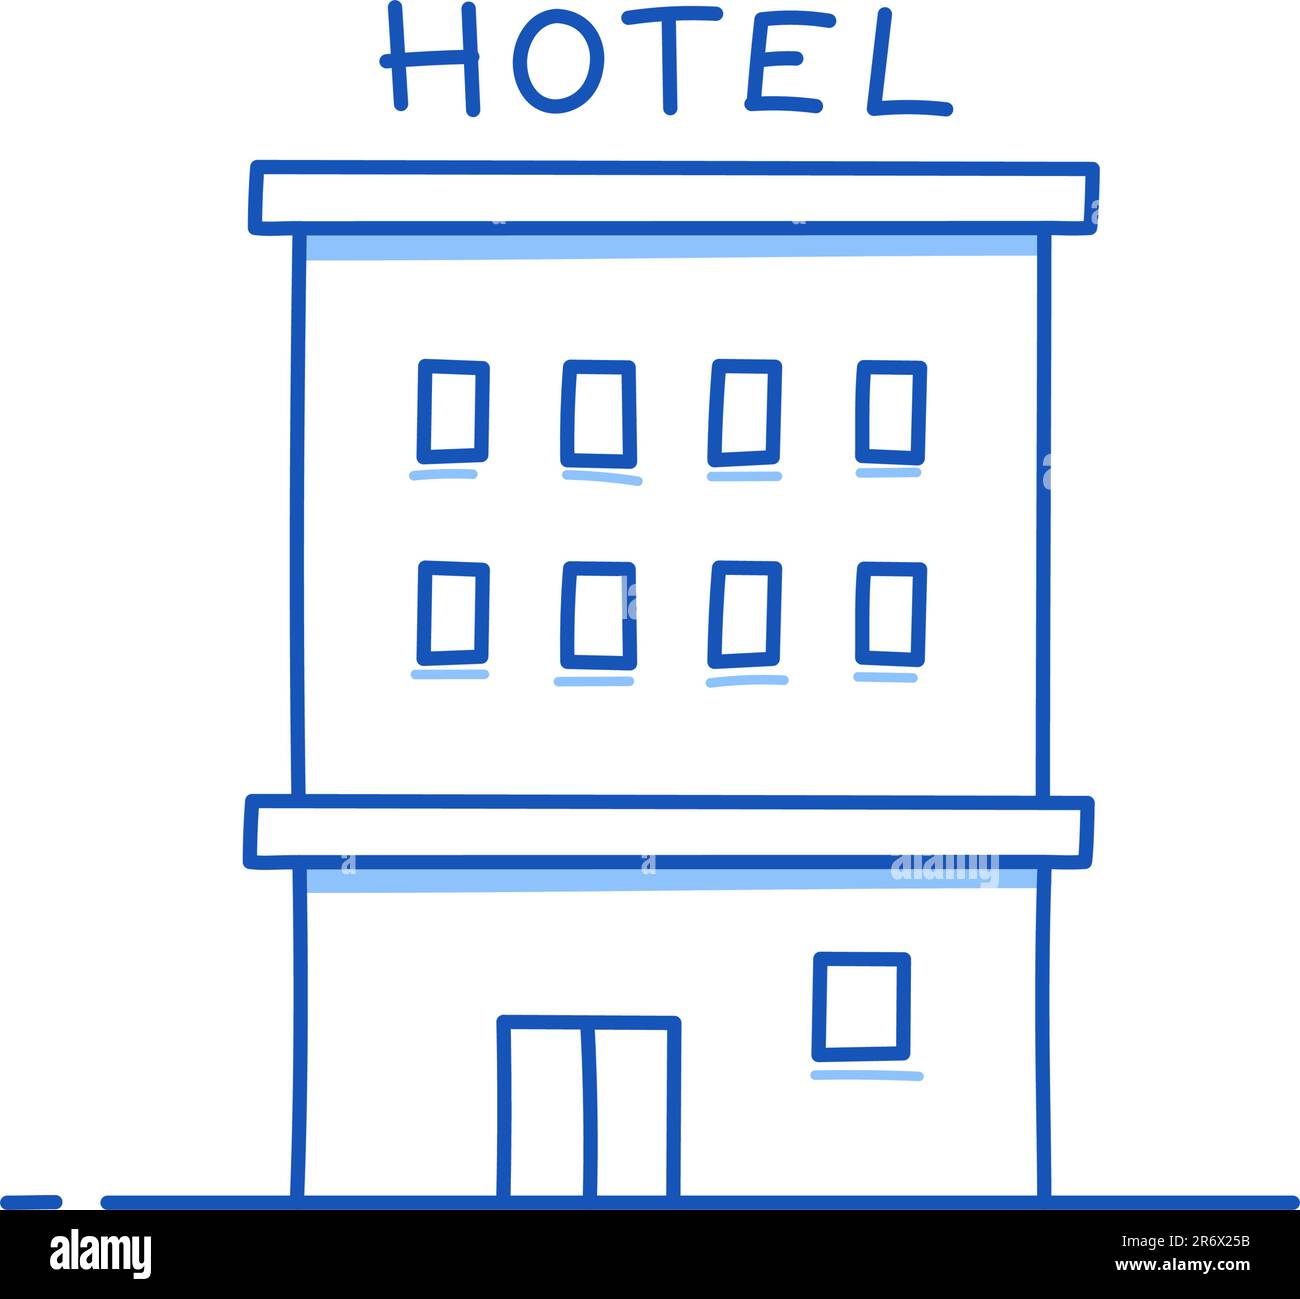 Marble Hotel Lobby: Over 2,309 Royalty-Free Licensable Stock Illustrations  & Drawings | Shutterstock